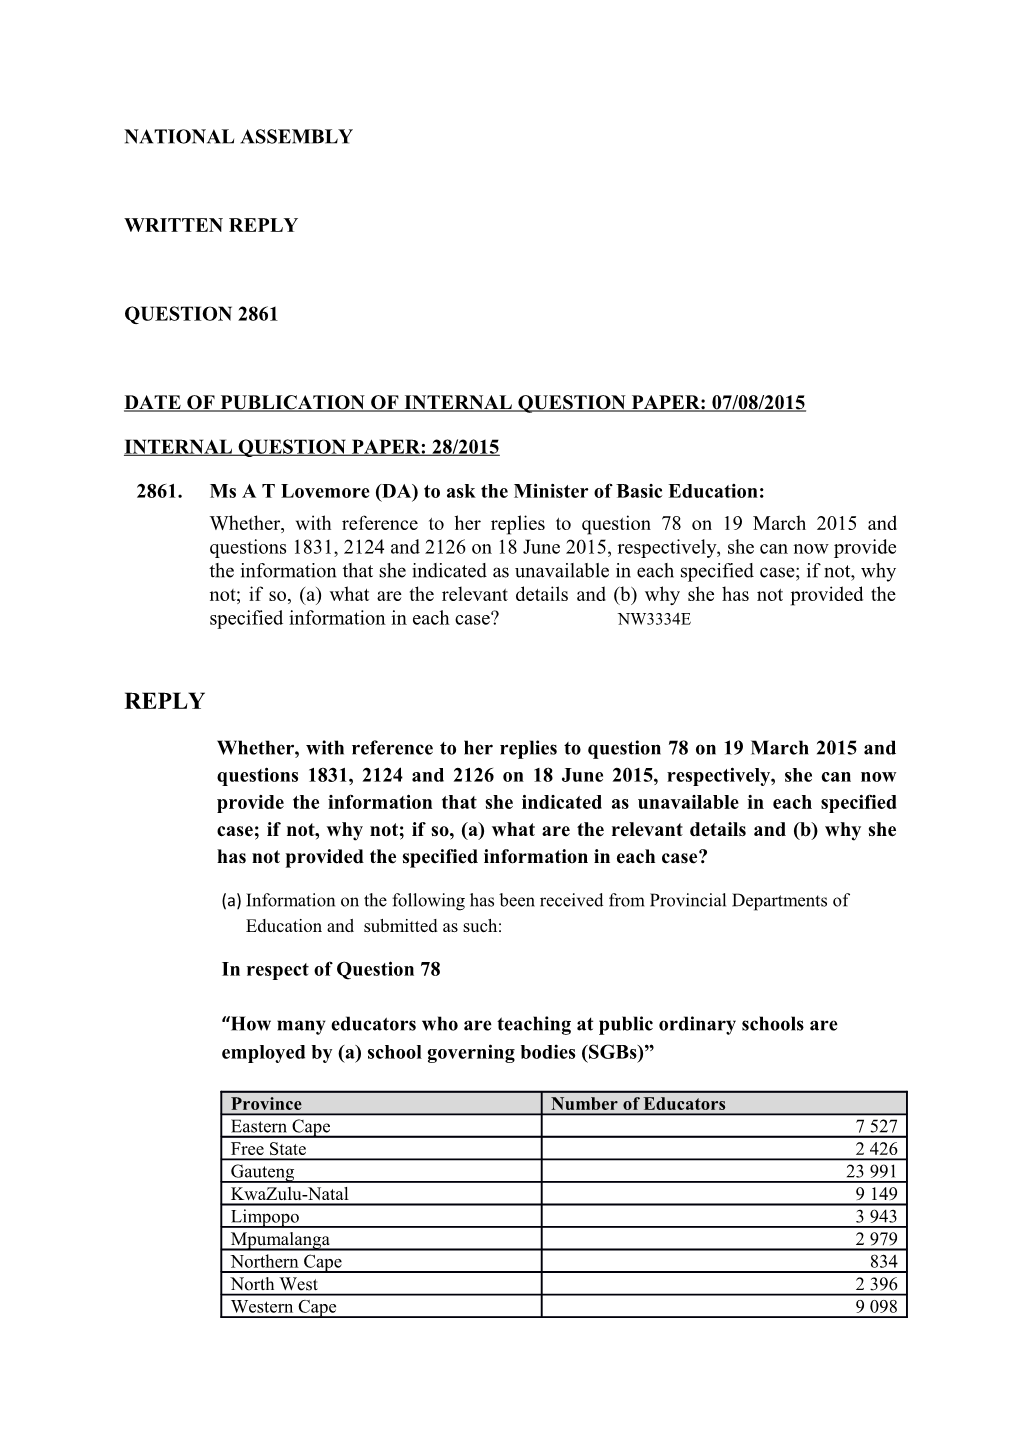 Date of Publication of Internal Question Paper: 07/08/2015